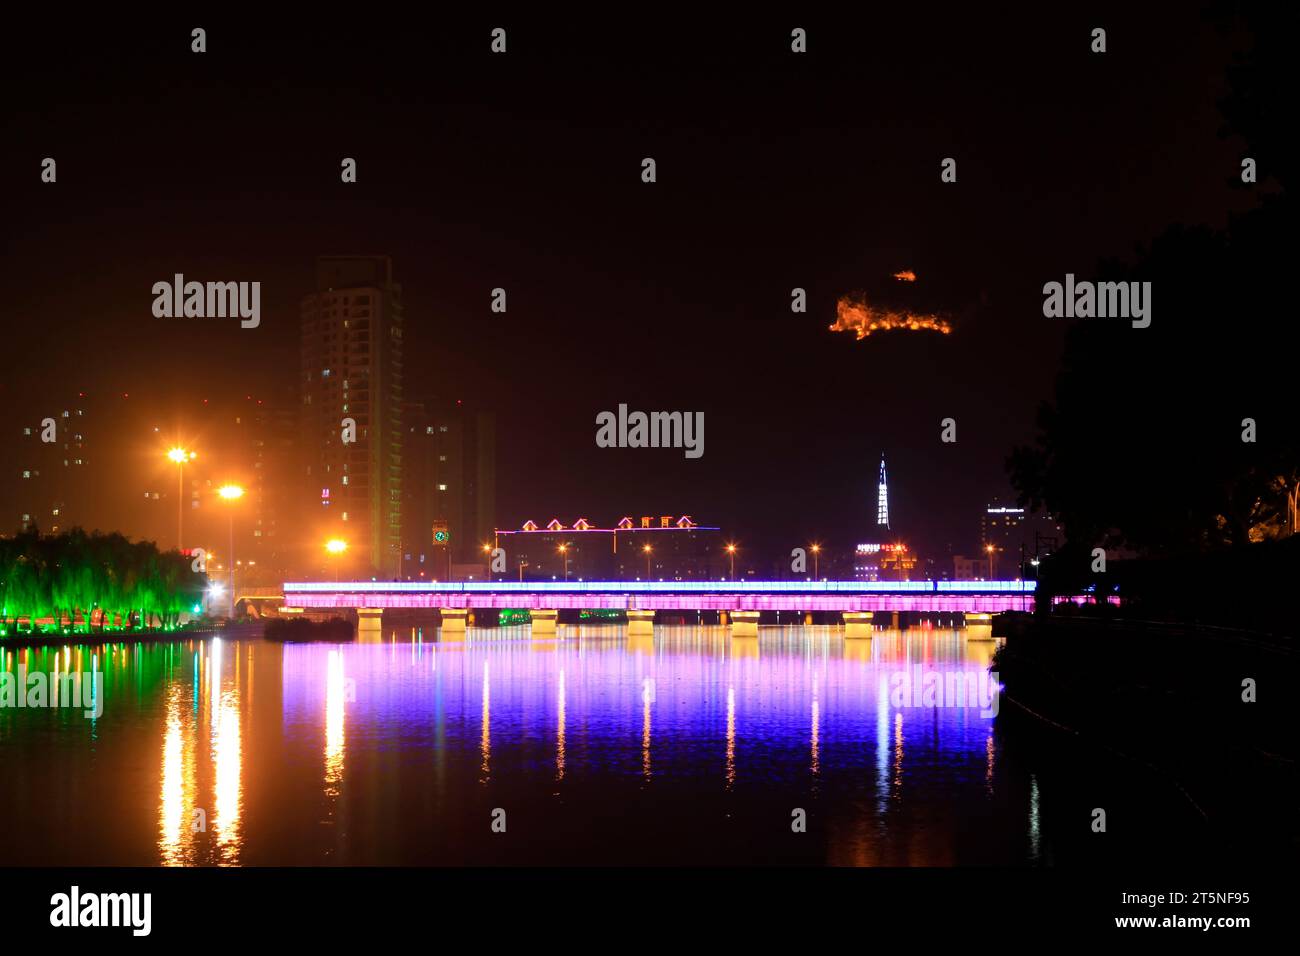 WuLie River night scenery in chengde city, China Stock Photo